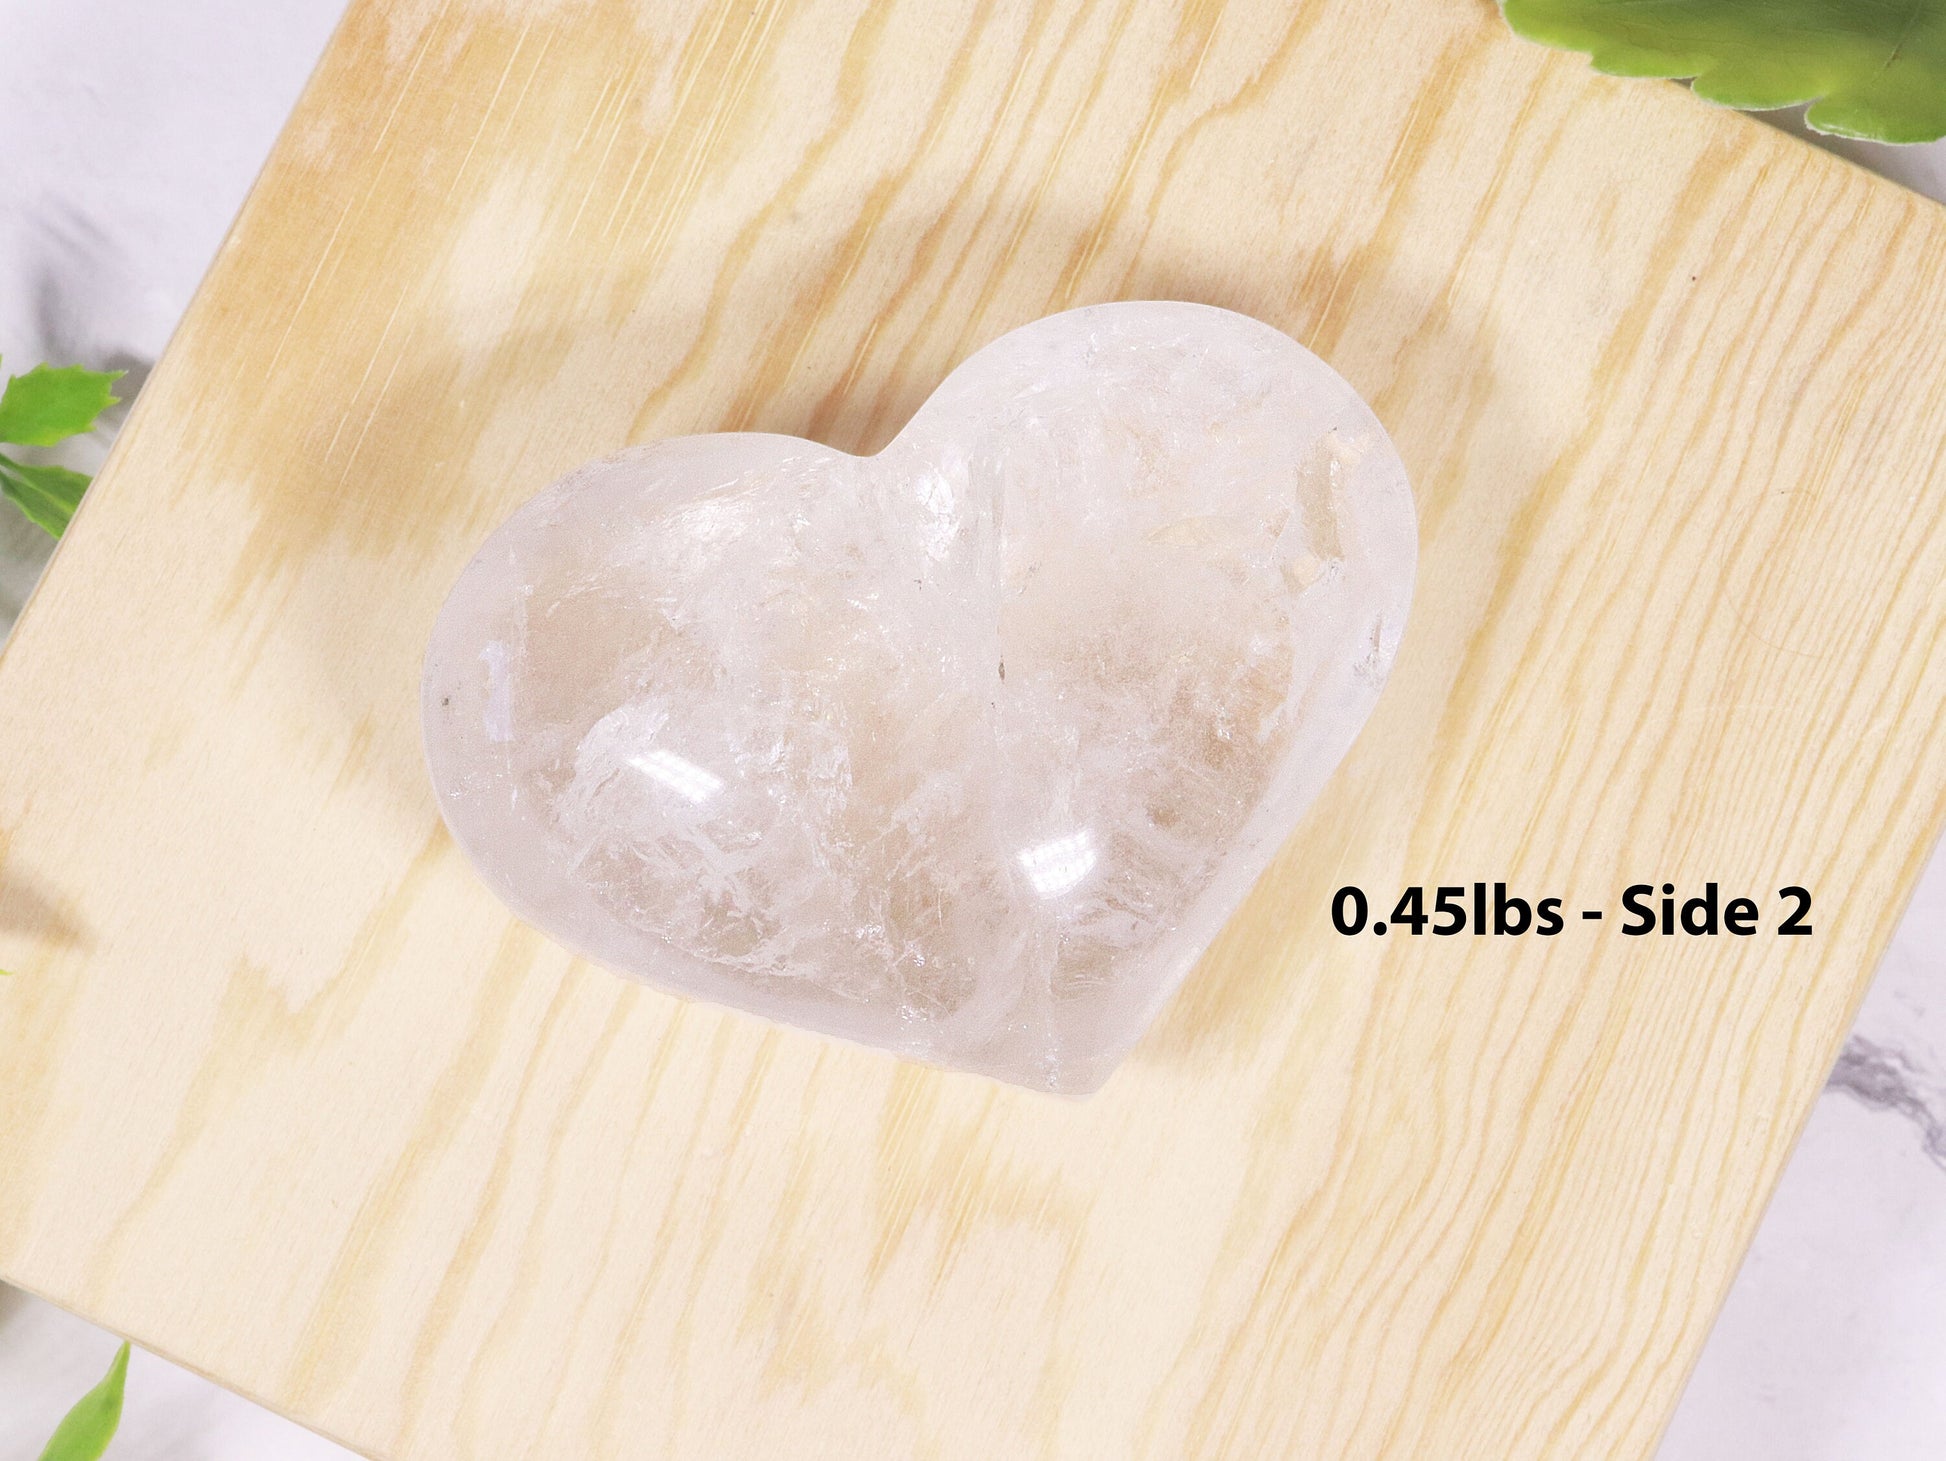 Clear Quartz Crystal Heart, Natural Polished Gemstone, Ethically Sourced